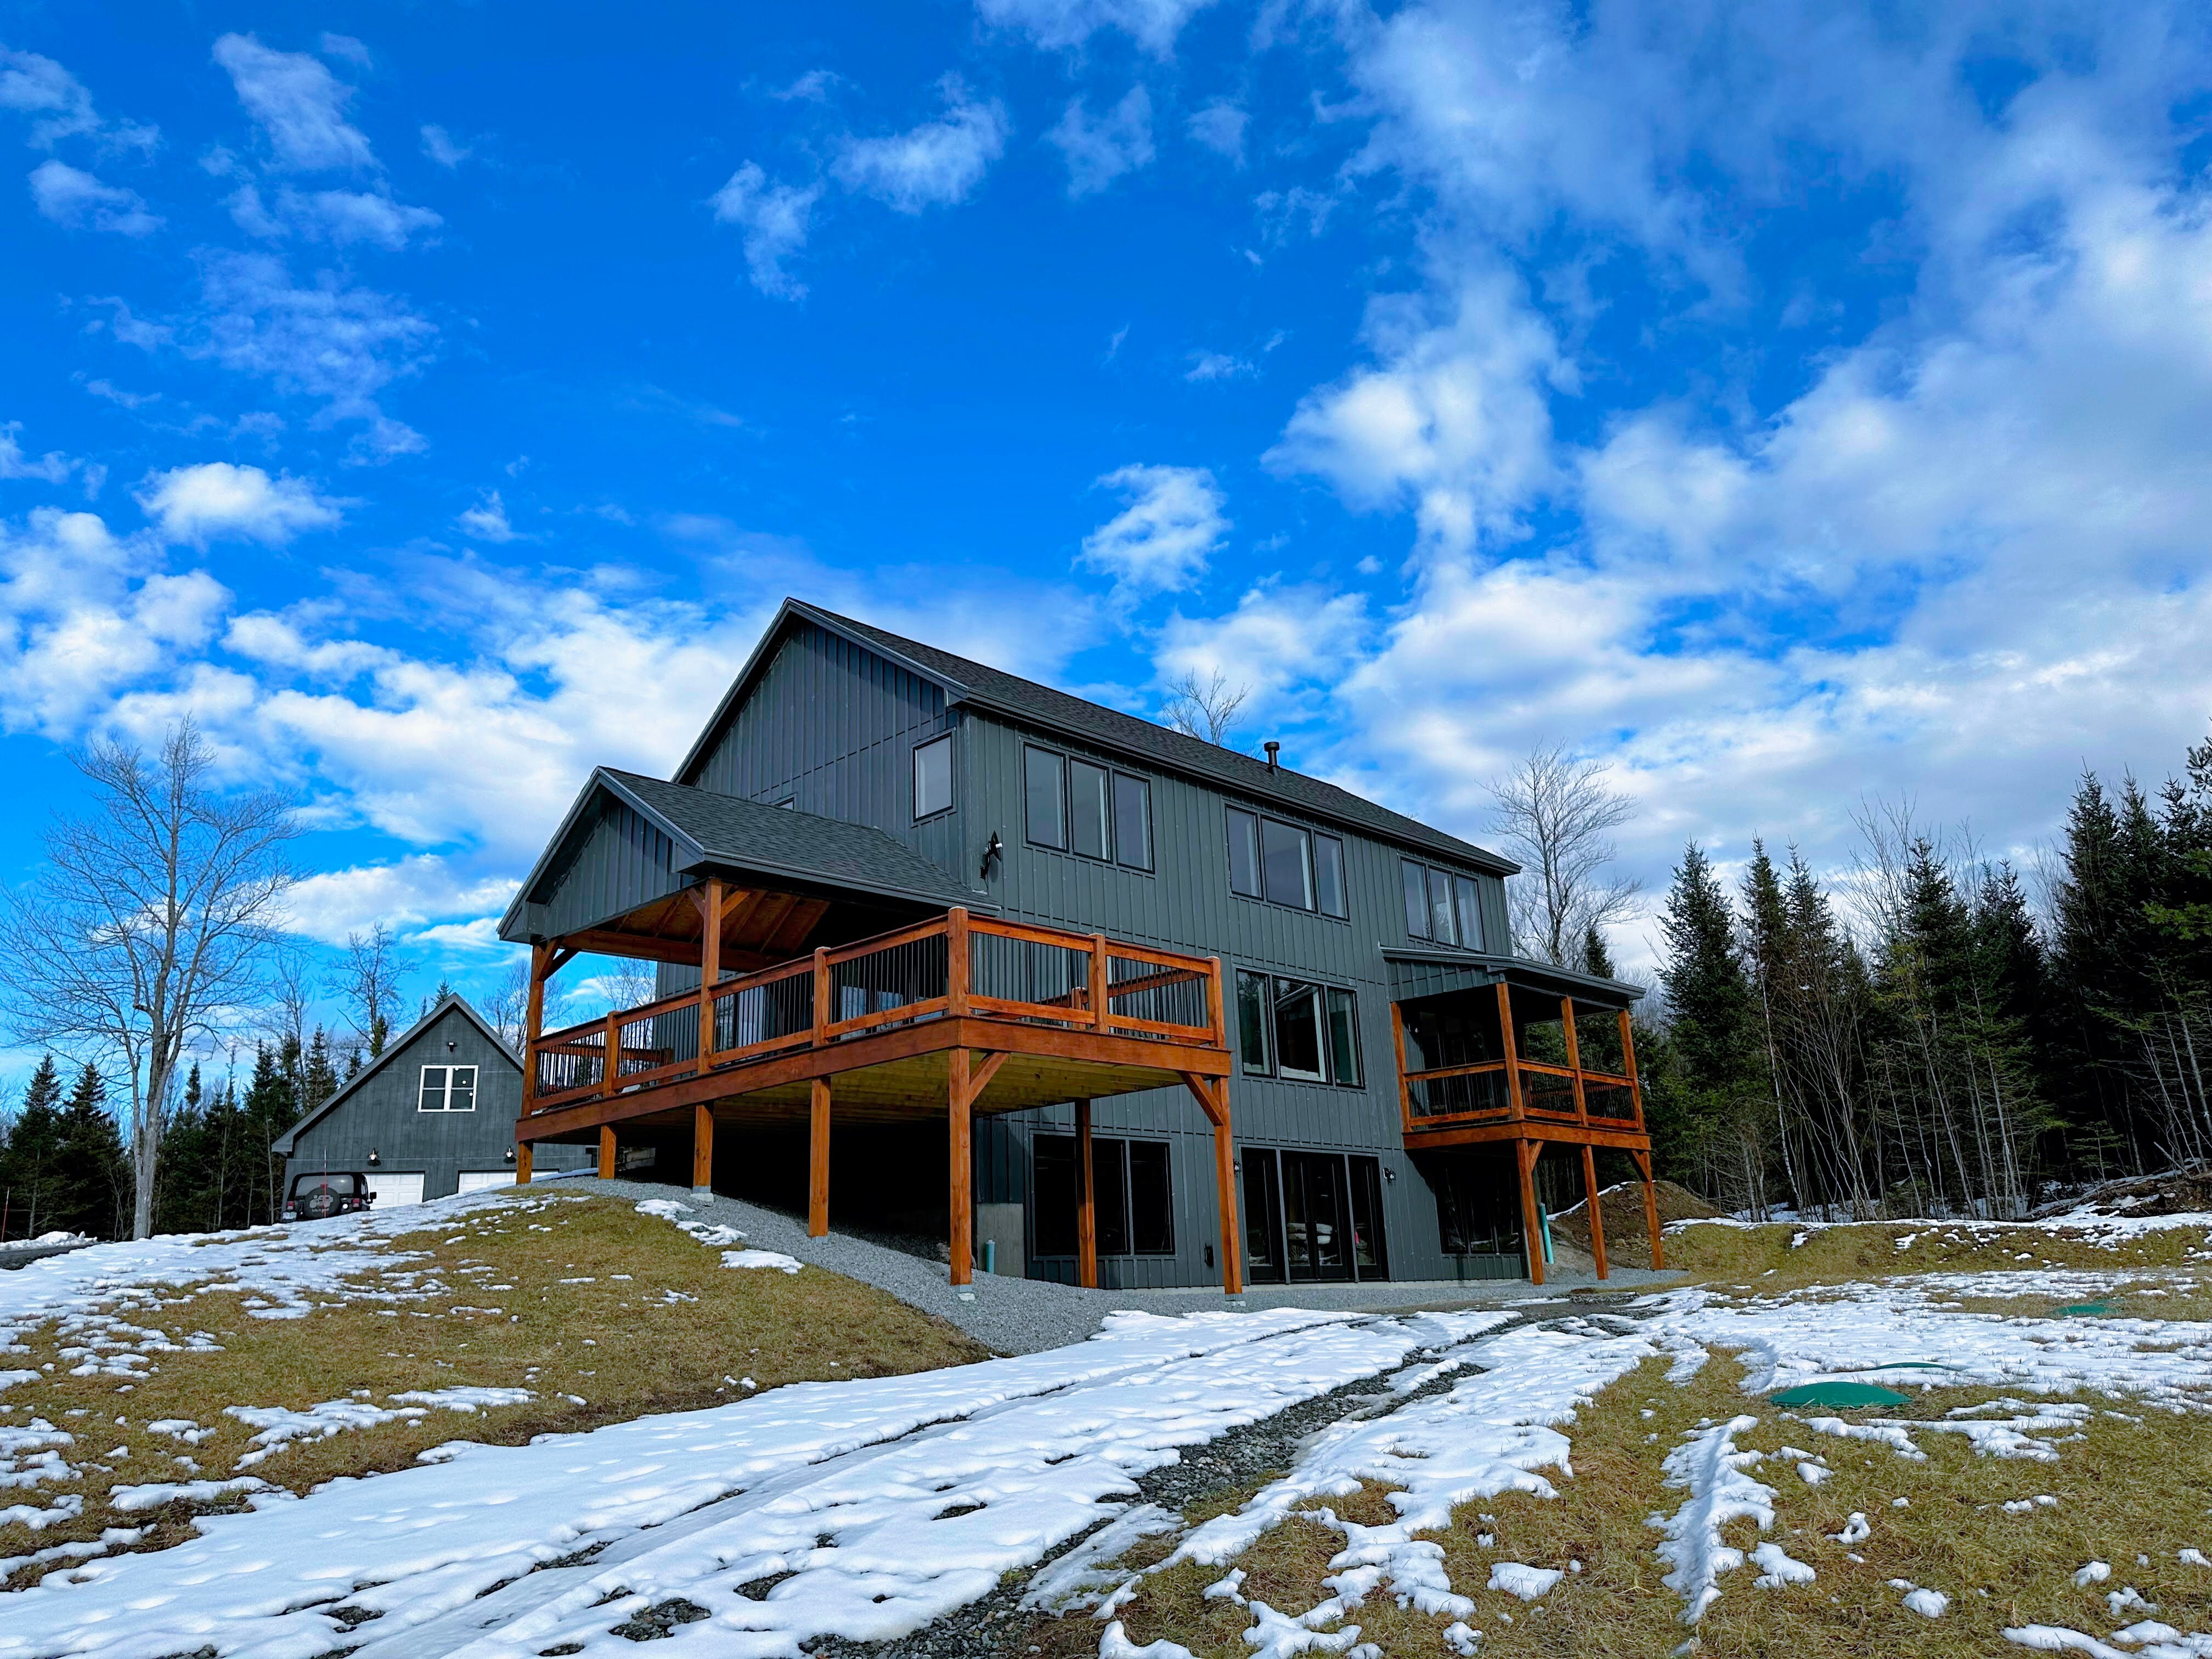 2M New rustic contemporary home with stunning views, great amenities and perfect private location.